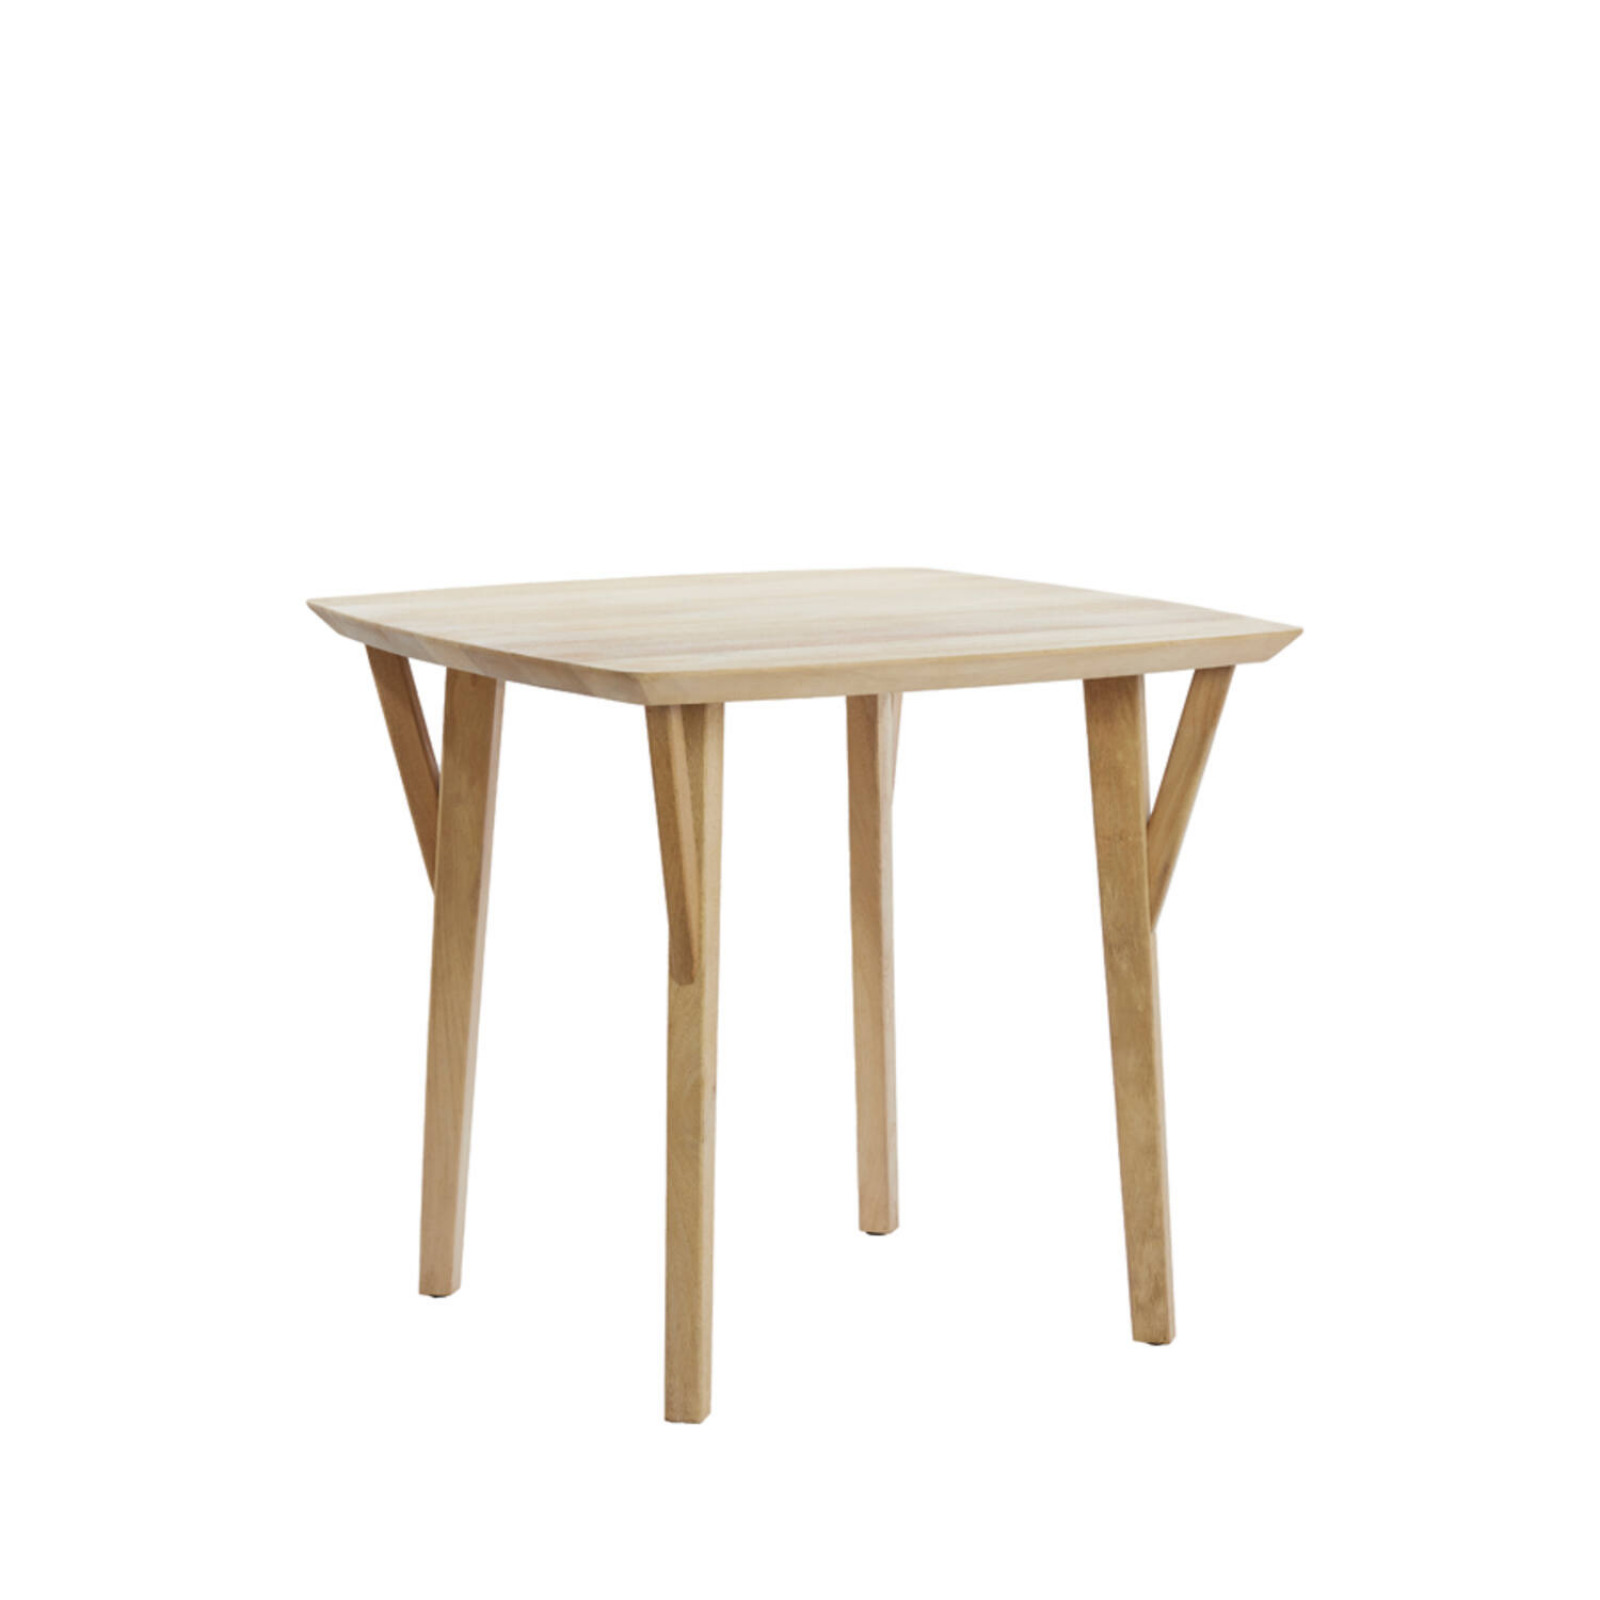 Quenza Sandy Beach rectangle dining table